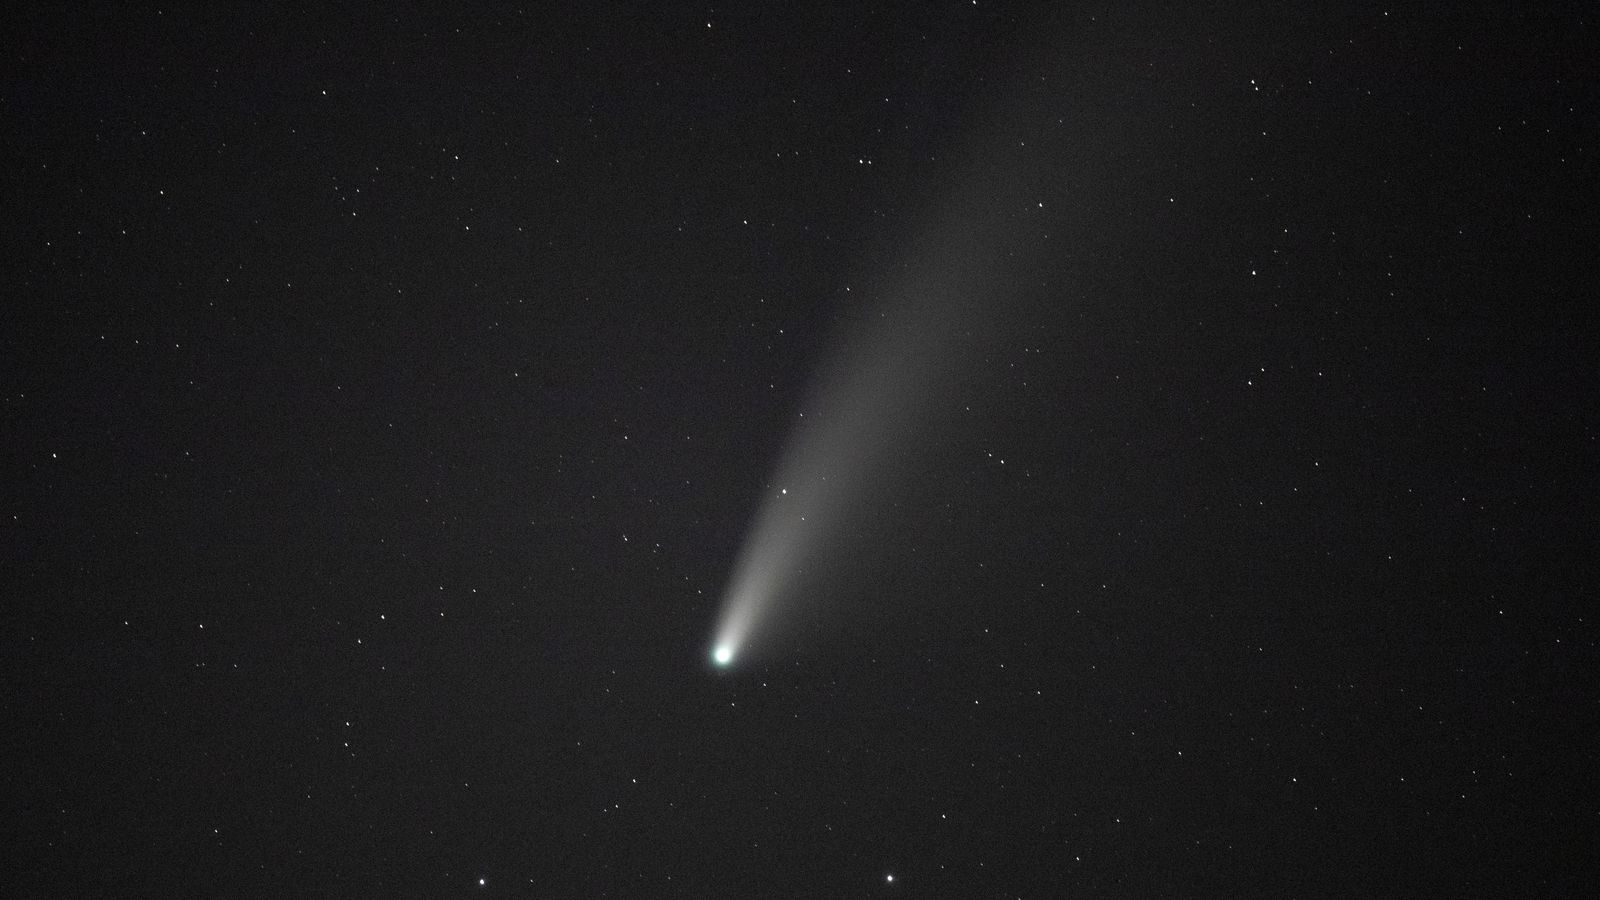 Comet Neowise can only be seen every 800 years. It takes patience to photograph it